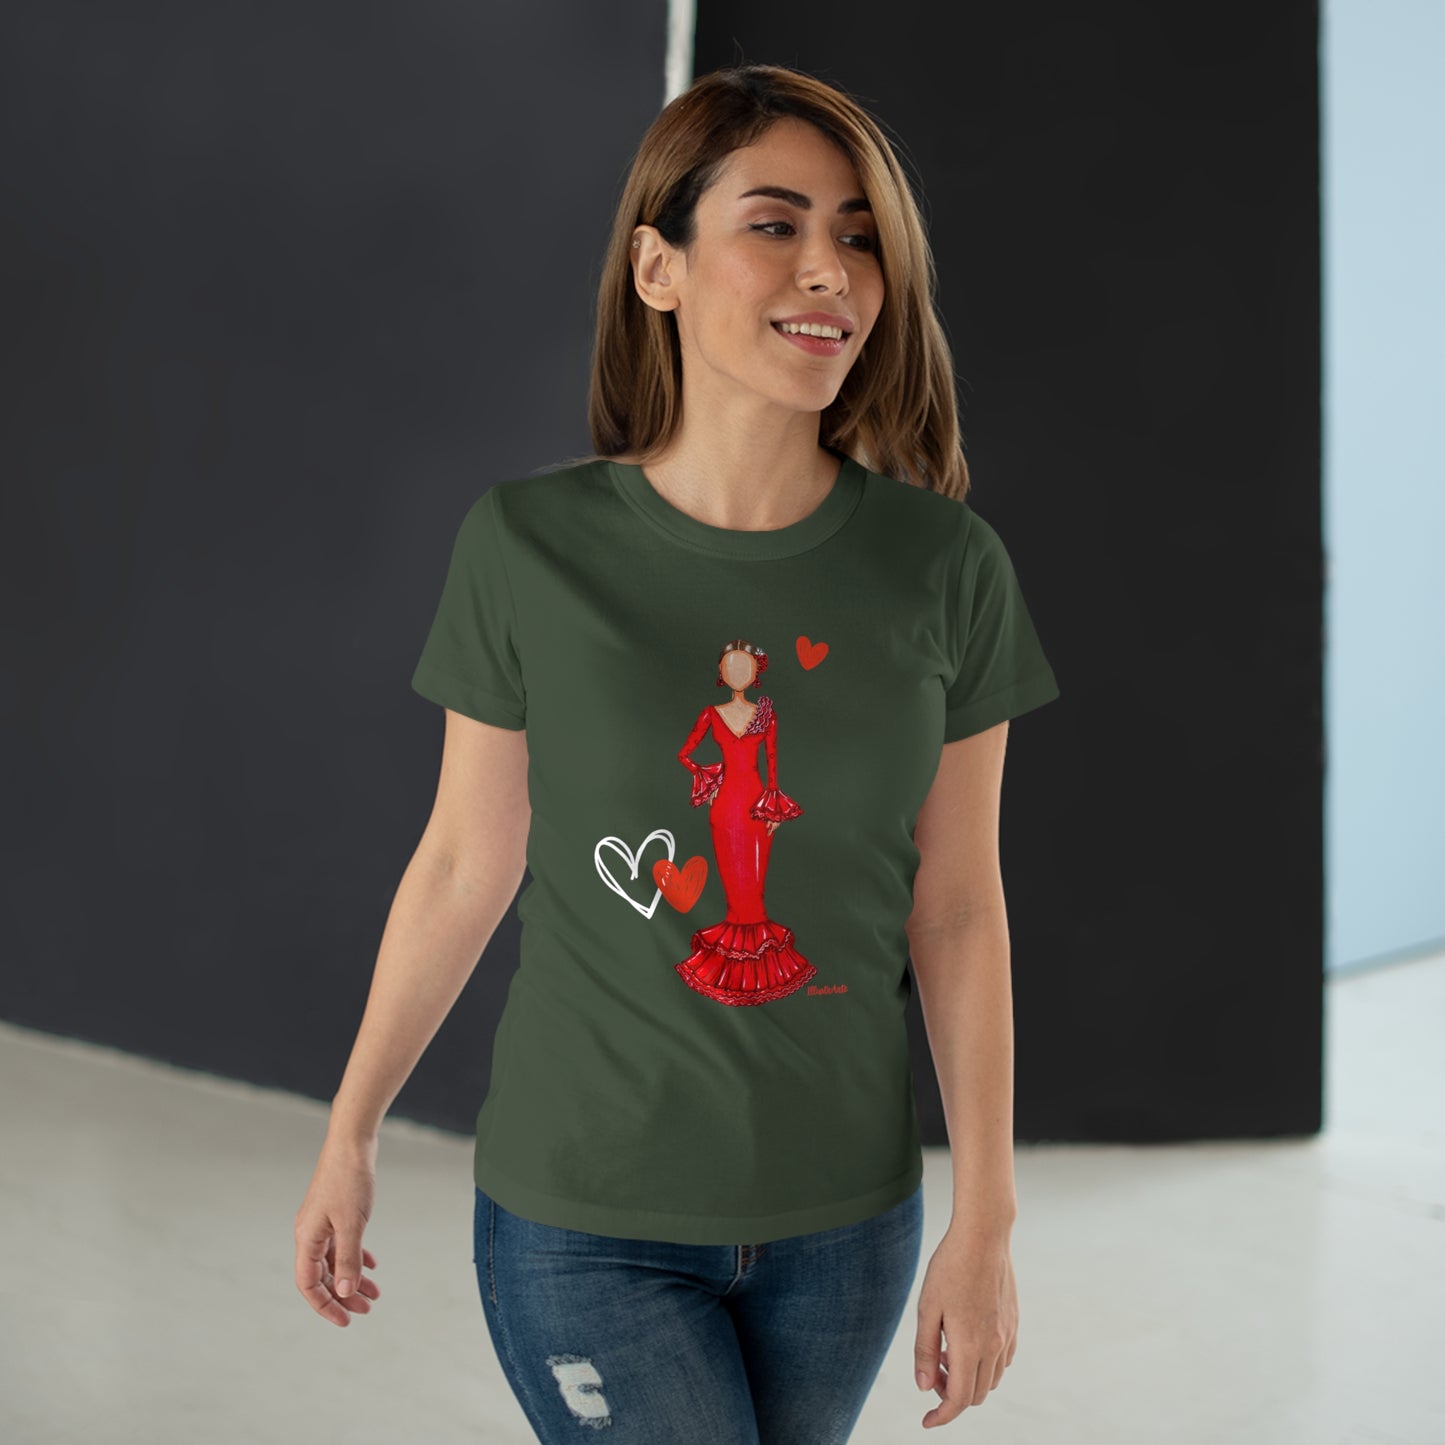 a woman wearing a green t - shirt with a red dress